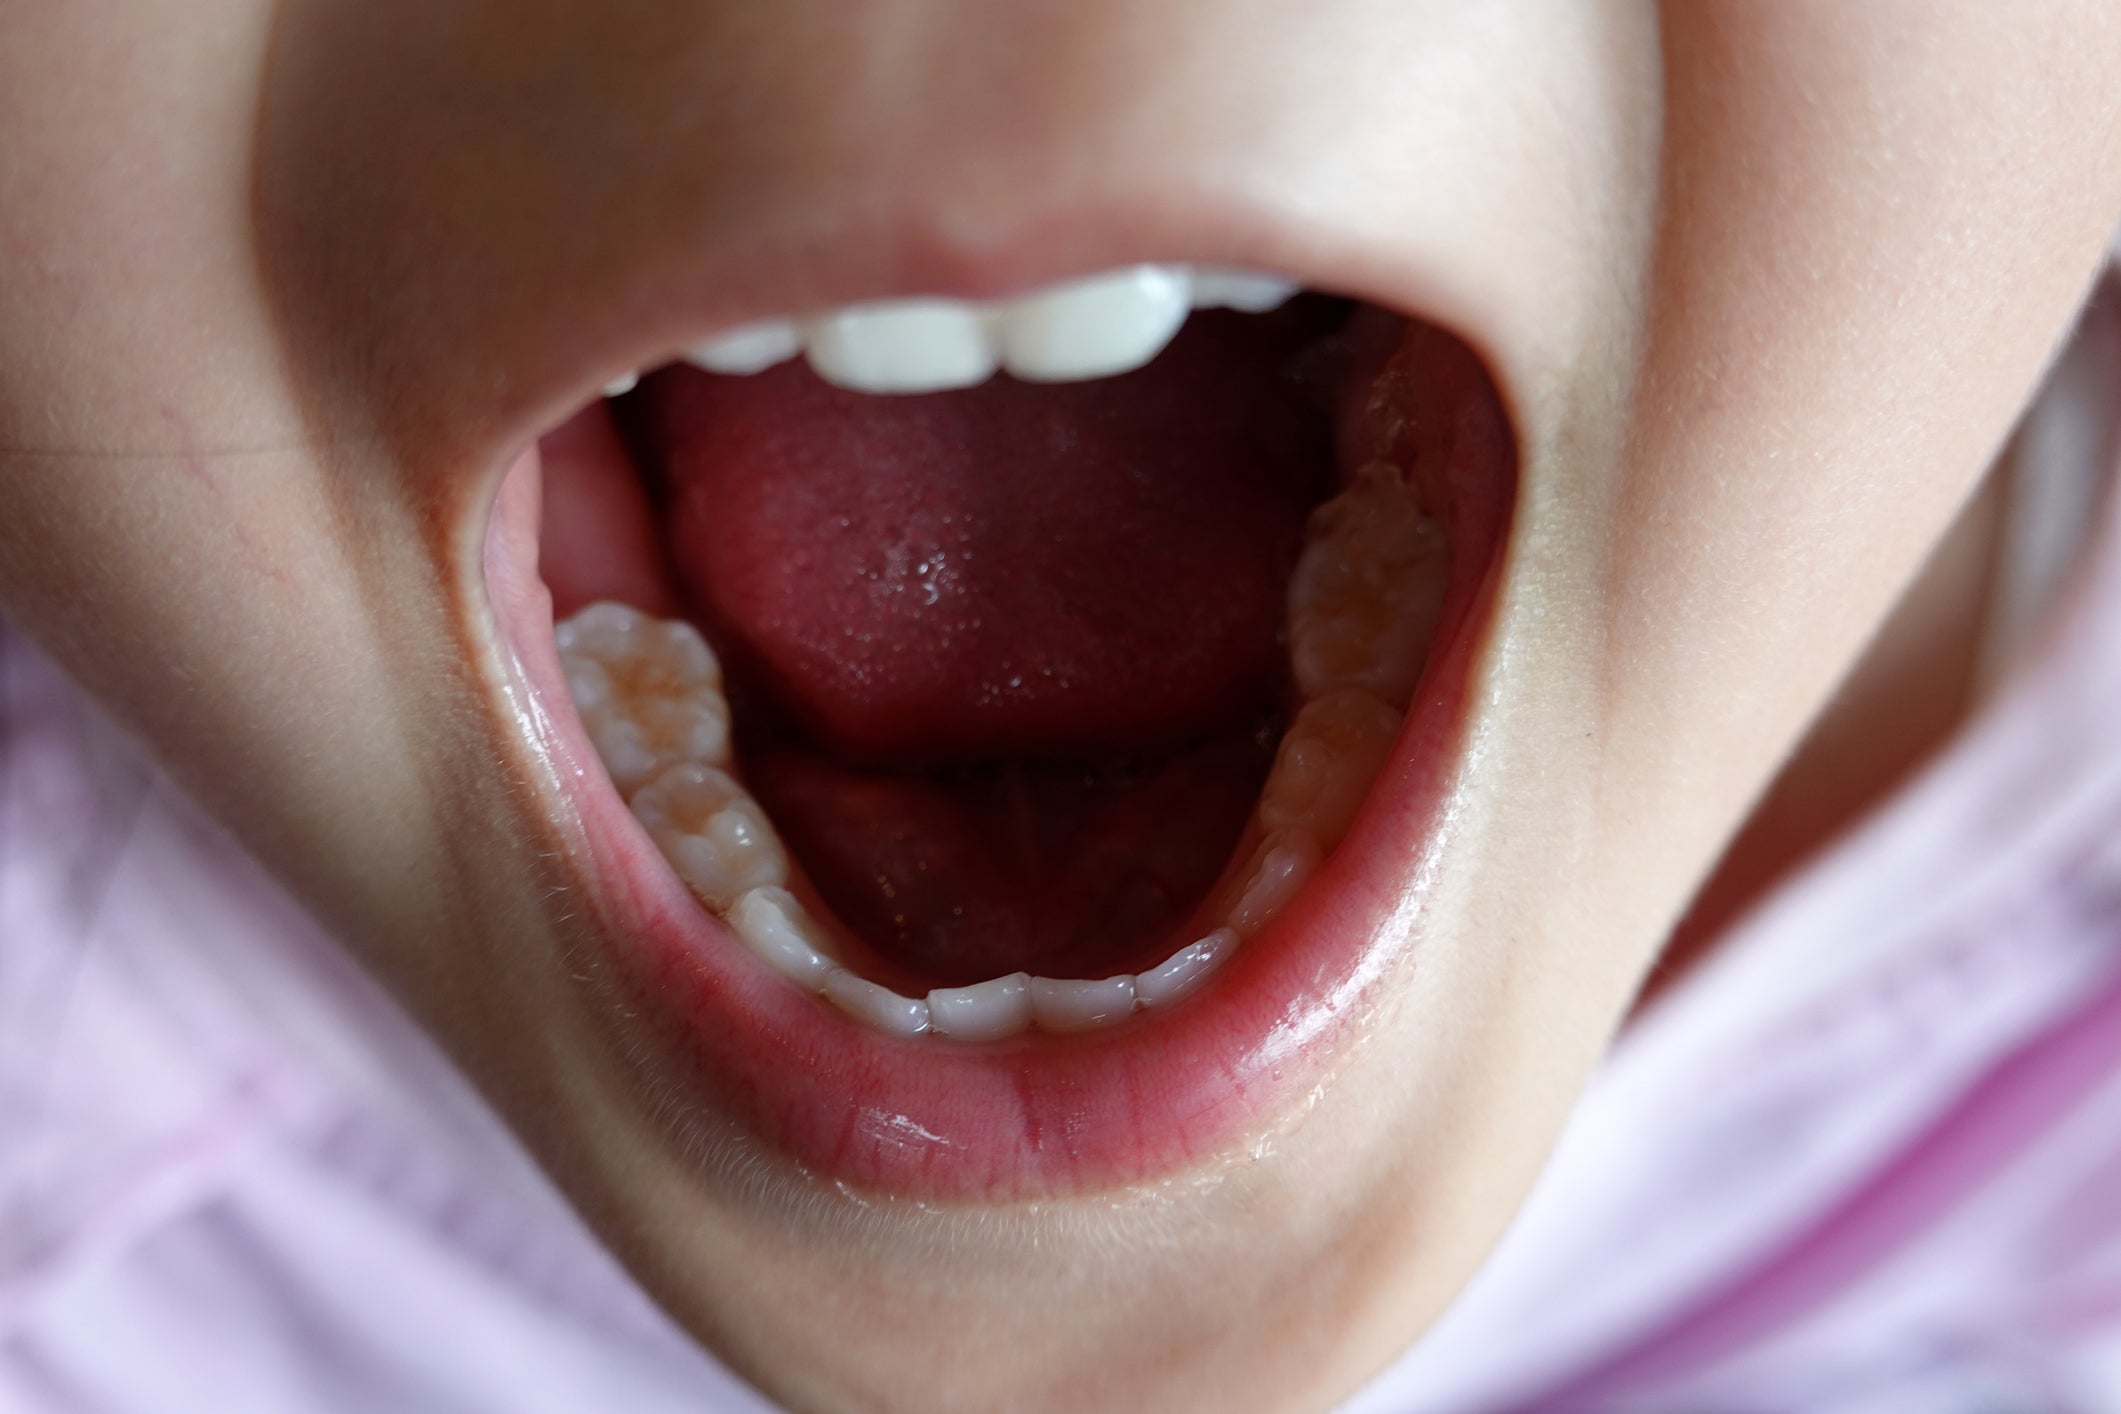 File photo: According to the NHS, babies’ bottom teeth are the first to arrive, usually at around five-to-seven months